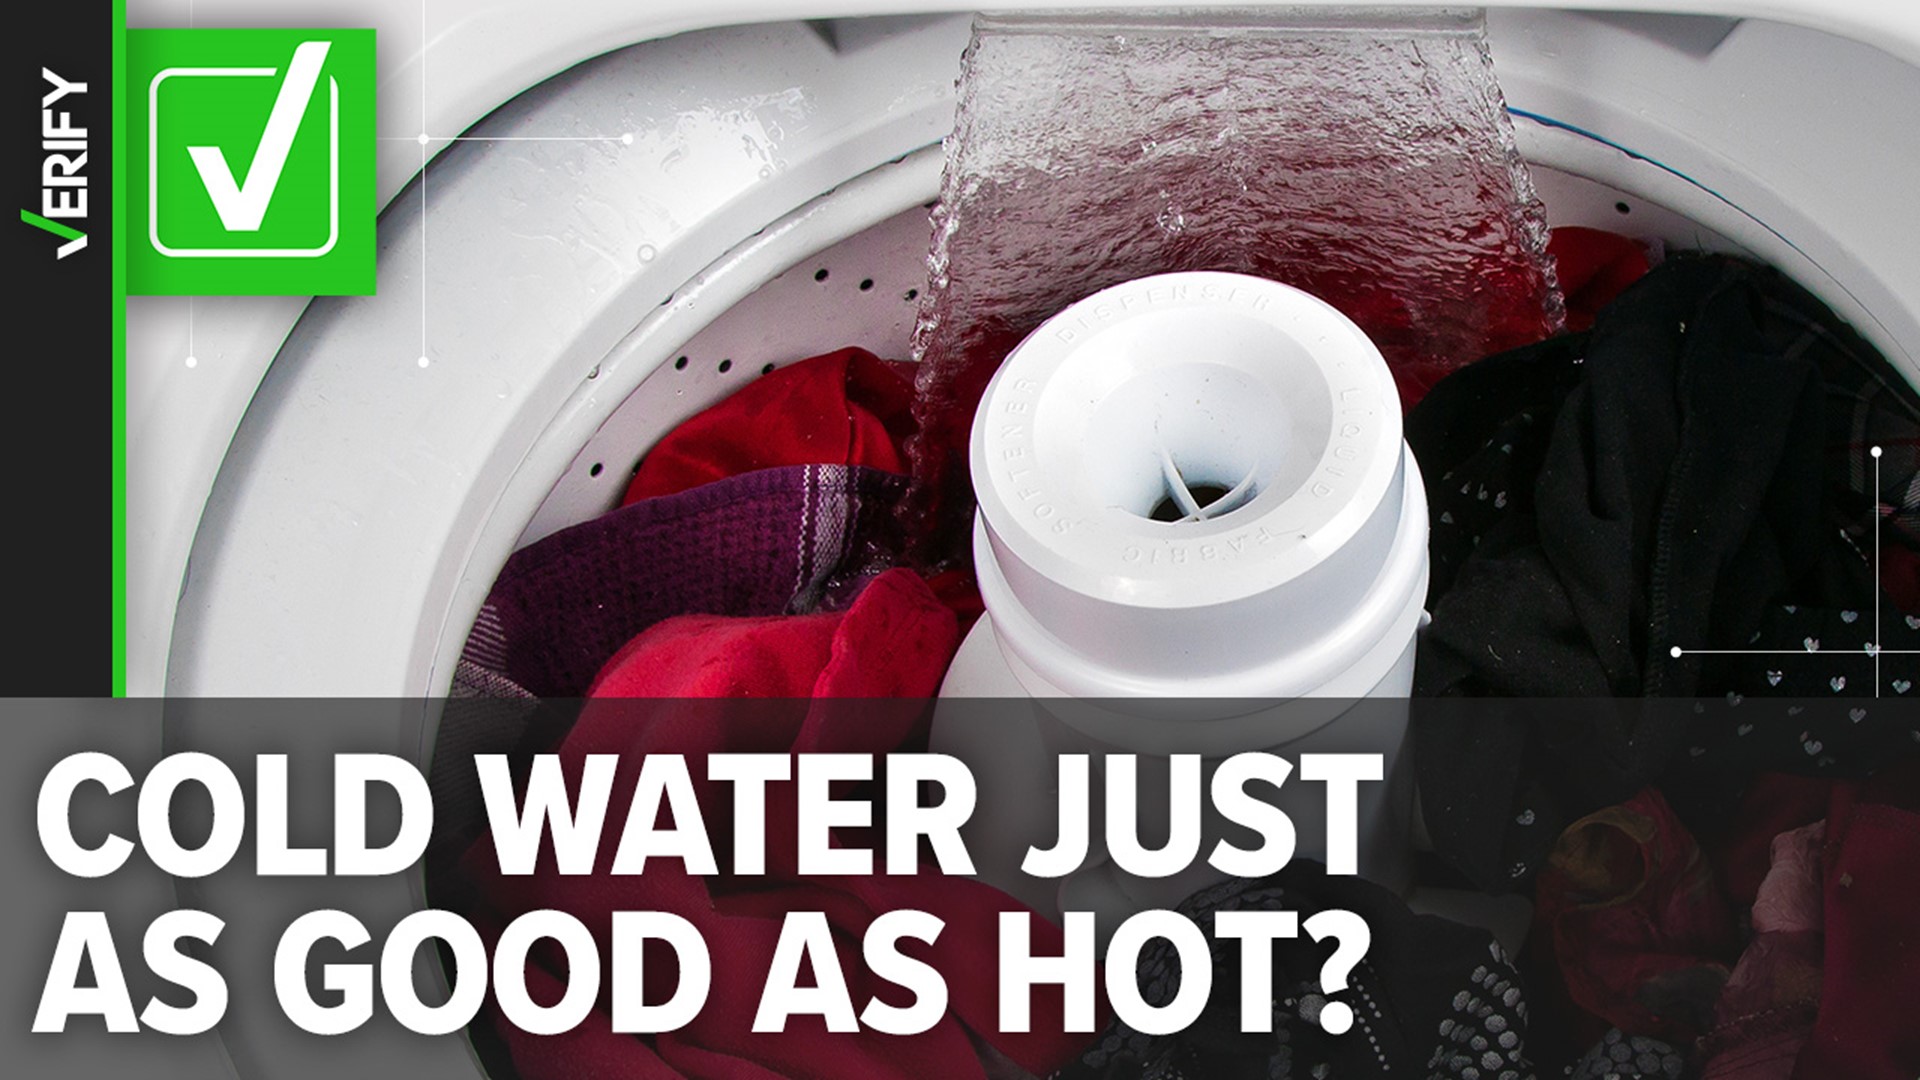 A lot of people believe using hot water cleans their clothes better than cold. But recent claims have been saying cold water is just as effective